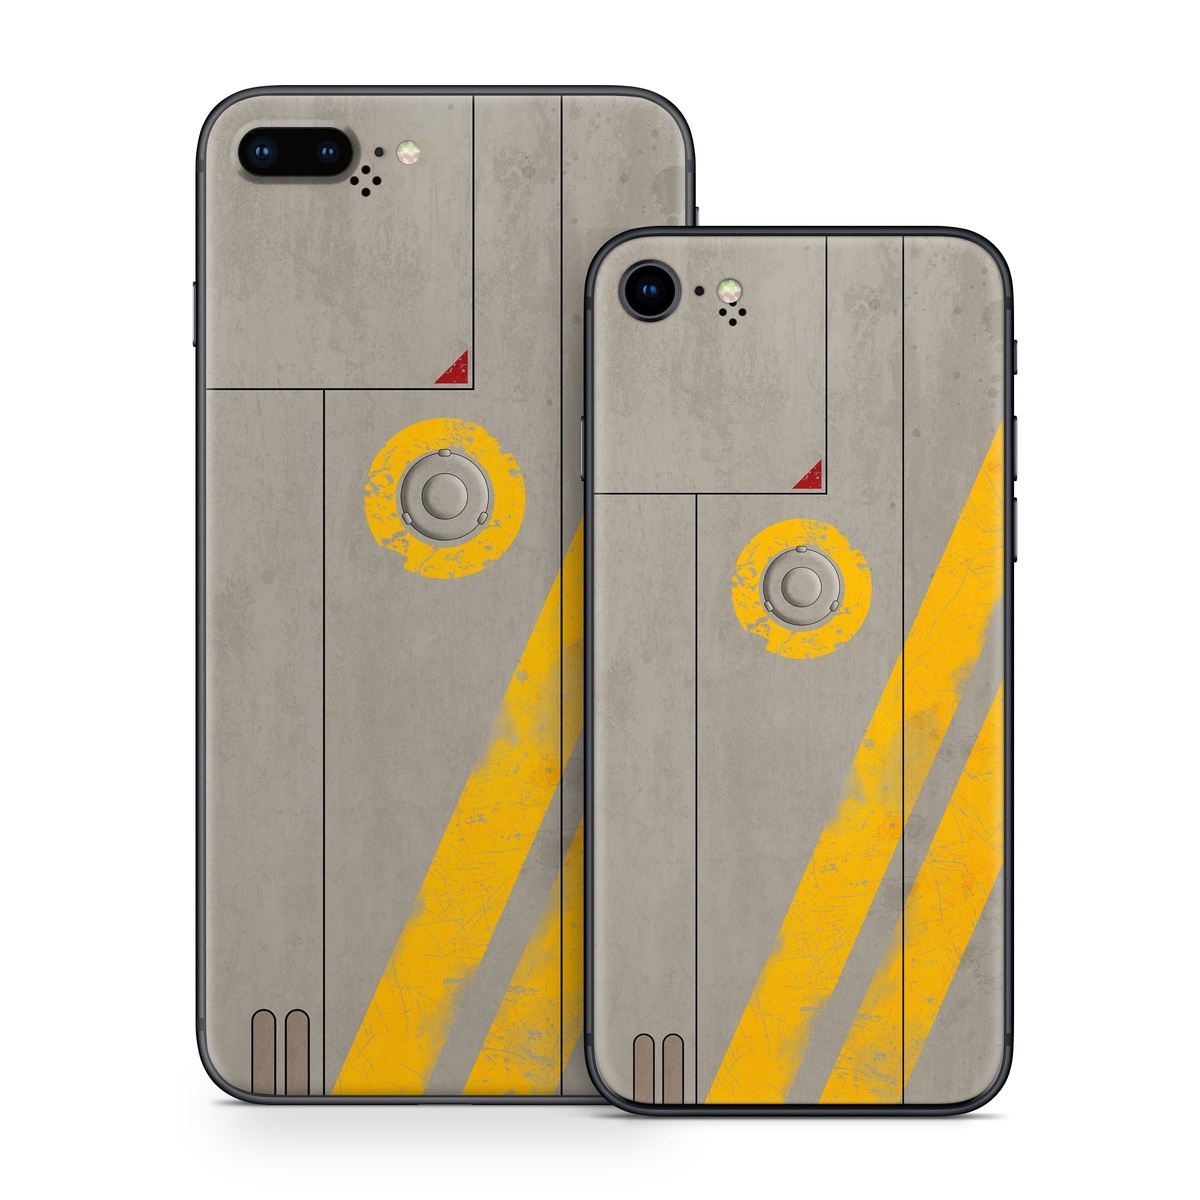 iPhone 8 Series Skin design of Yellow, Wall, Line, Orange, Design, Concrete, Font, Architecture, Parallel, Wood, with gray, yellow, red, black colors